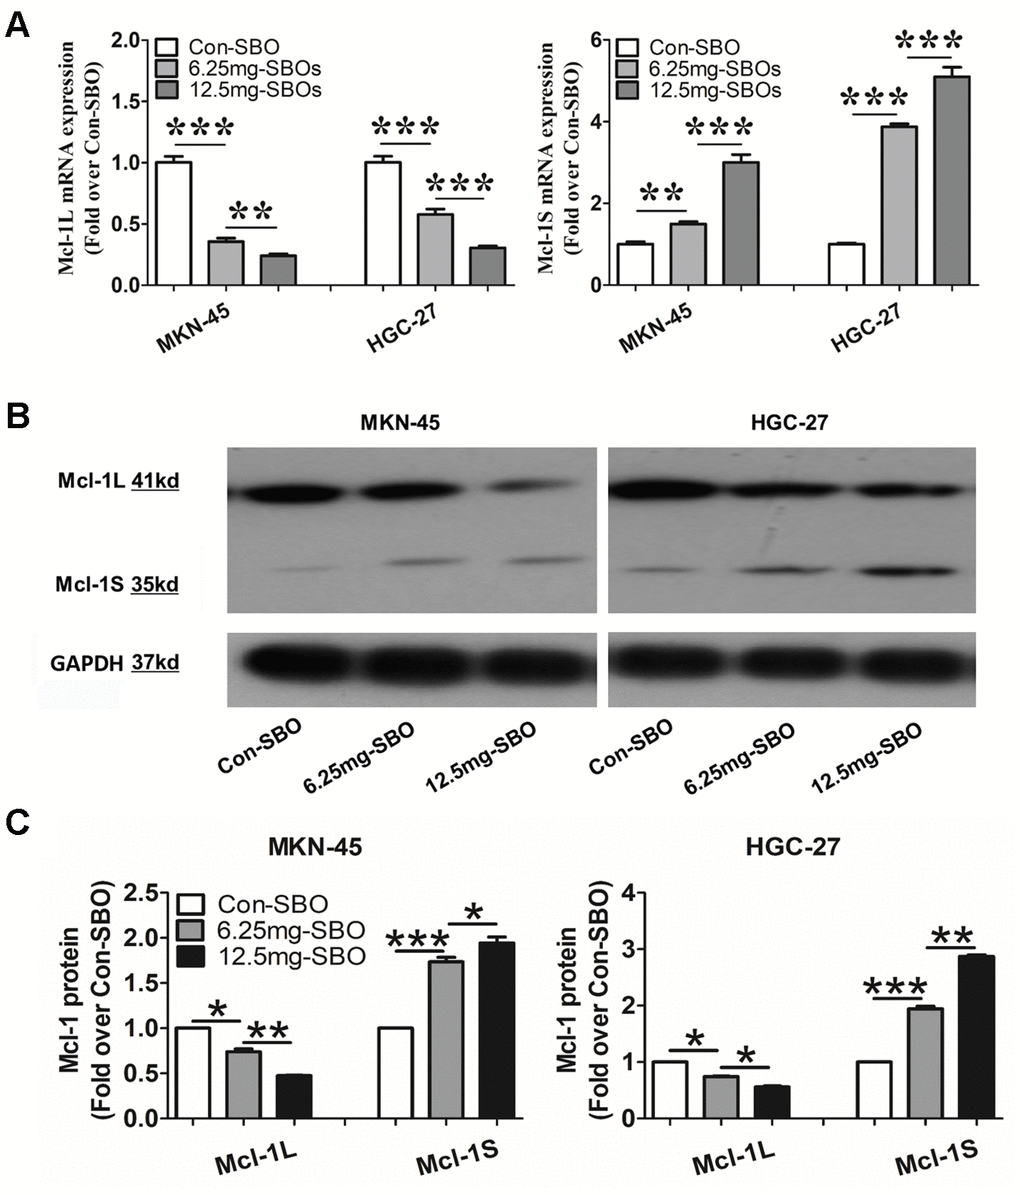 The myeloid cell leukemia (Mcl)-1 splicing shifts from Mcl-1L to Mcl-1S after injection of the vivo-morpholino-modified steric-blocking oligonucleotides (SBOs) in the mouse xenograft models of MKN-45 and HGC-27 cells. (A) Mcl-1L and Mcl-1S messenger RNA (mRNA) expression in the MKN-45 and HGC-27 xenograft models treated with vivo-morpholino-modified SBOs at different dosages is presented. Data are shown as the means ± standard deviation (SD). **p B) Mcl-1L and Mcl-1S protein expression in the xenograft models after treatment with SBOs at indicated doses is shown. (C) Decreased Mcl-1L and increased Mcl-1S protein expression levels and Mcl-1S/Mcl-1L values after SBO treatment are presented. Data are shown as the means ± SD. *p 